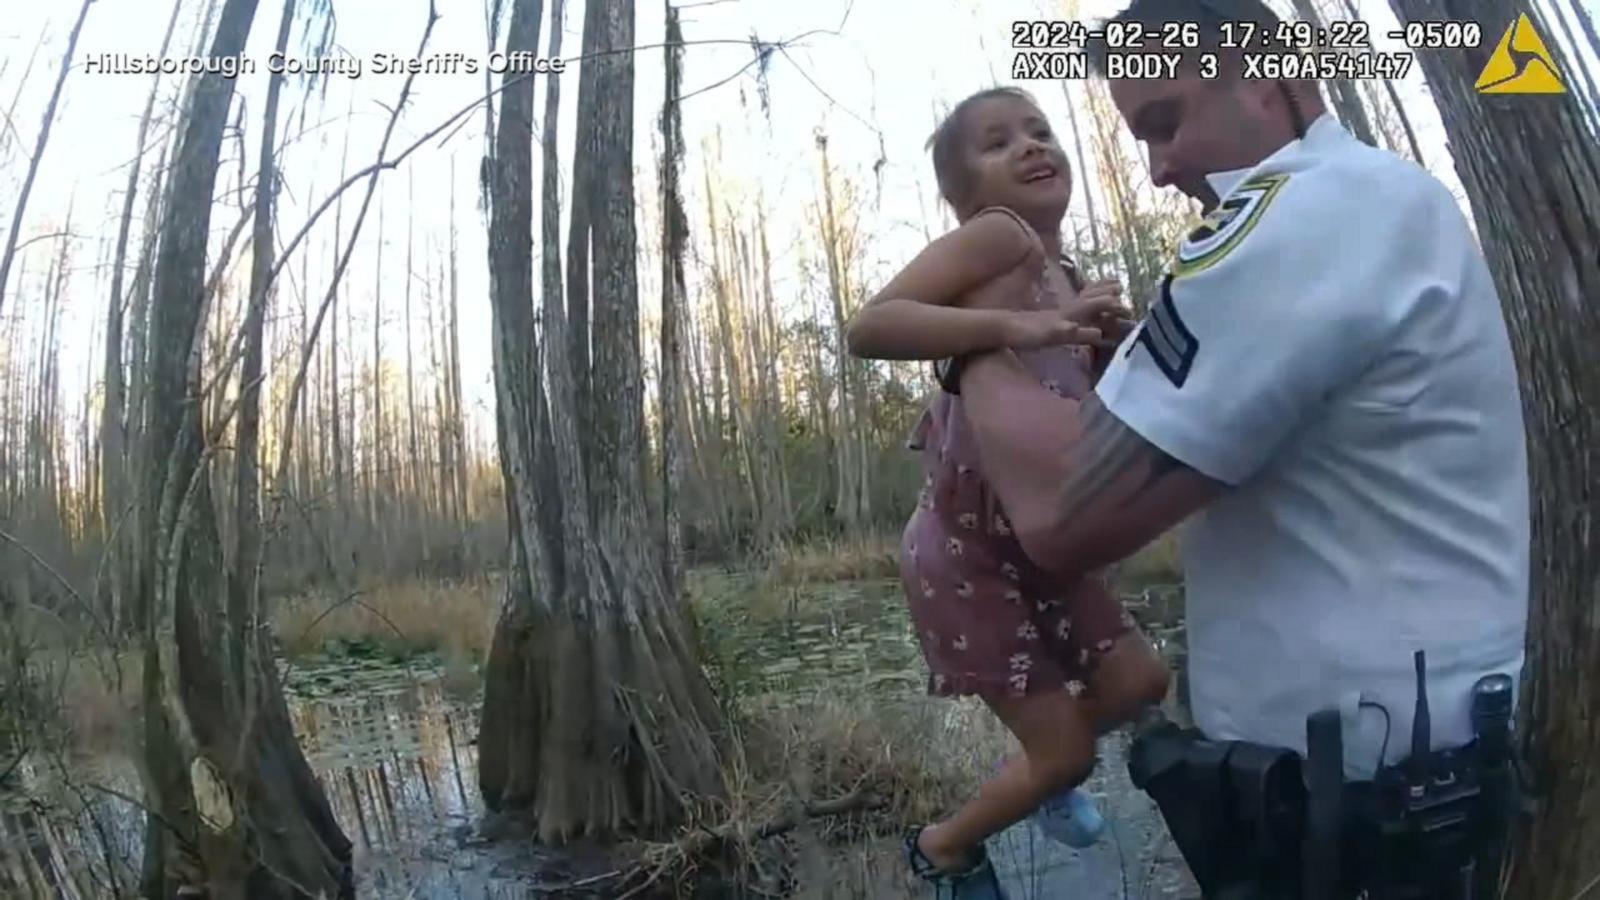 VIDEO: Deputies rescue young girl with autism